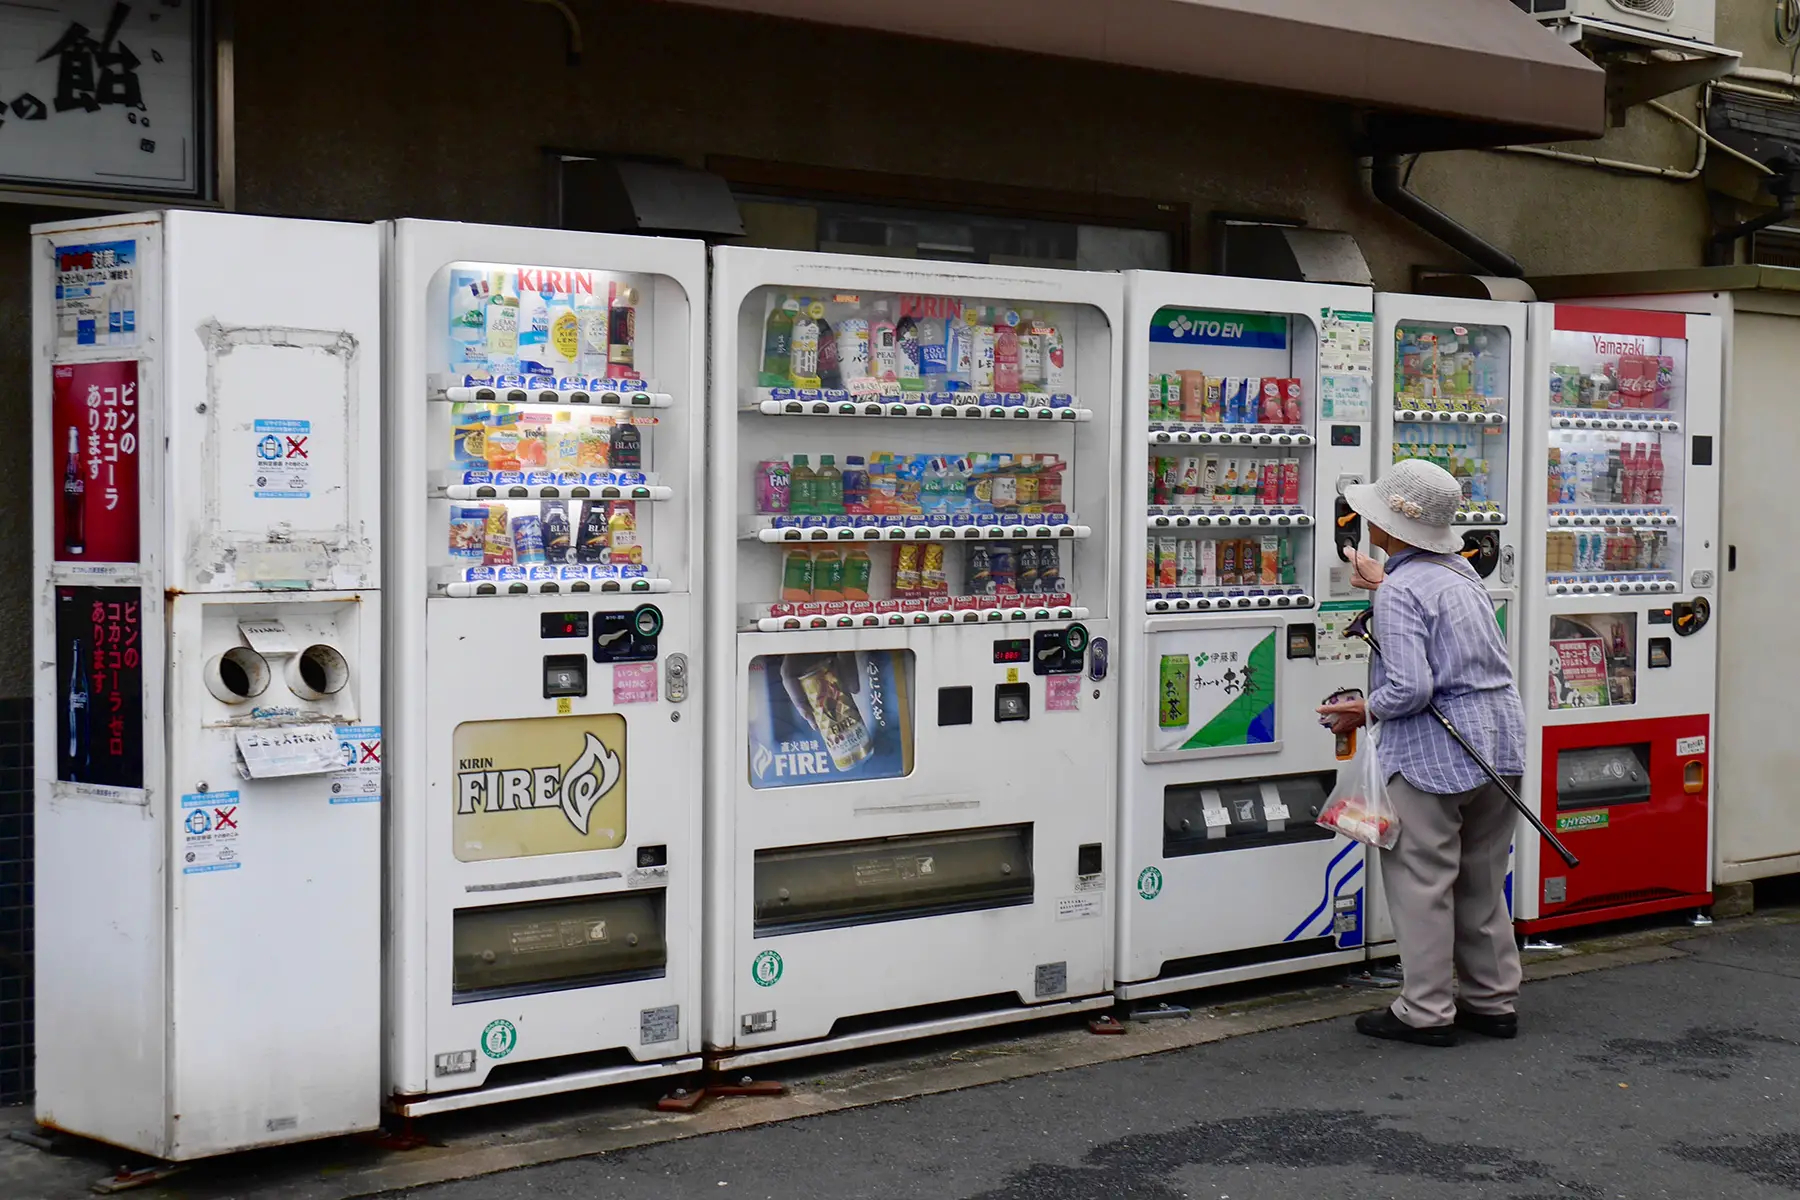 A women buys a drink from a row of vending machines in Tokyo, filled with plastic bottles and containers